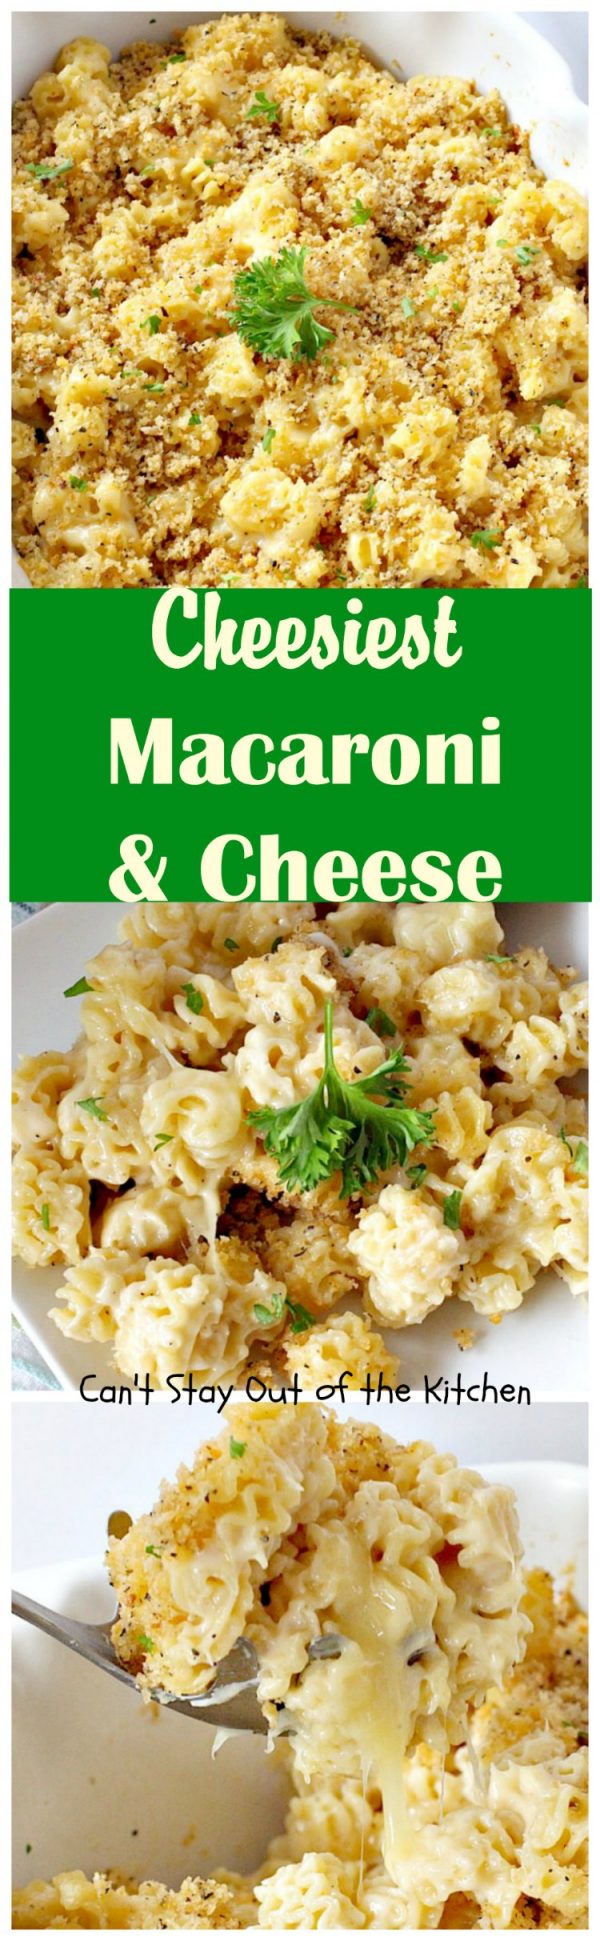 Cheesiest Macaroni and Cheese – Can't Stay Out of the Kitchen